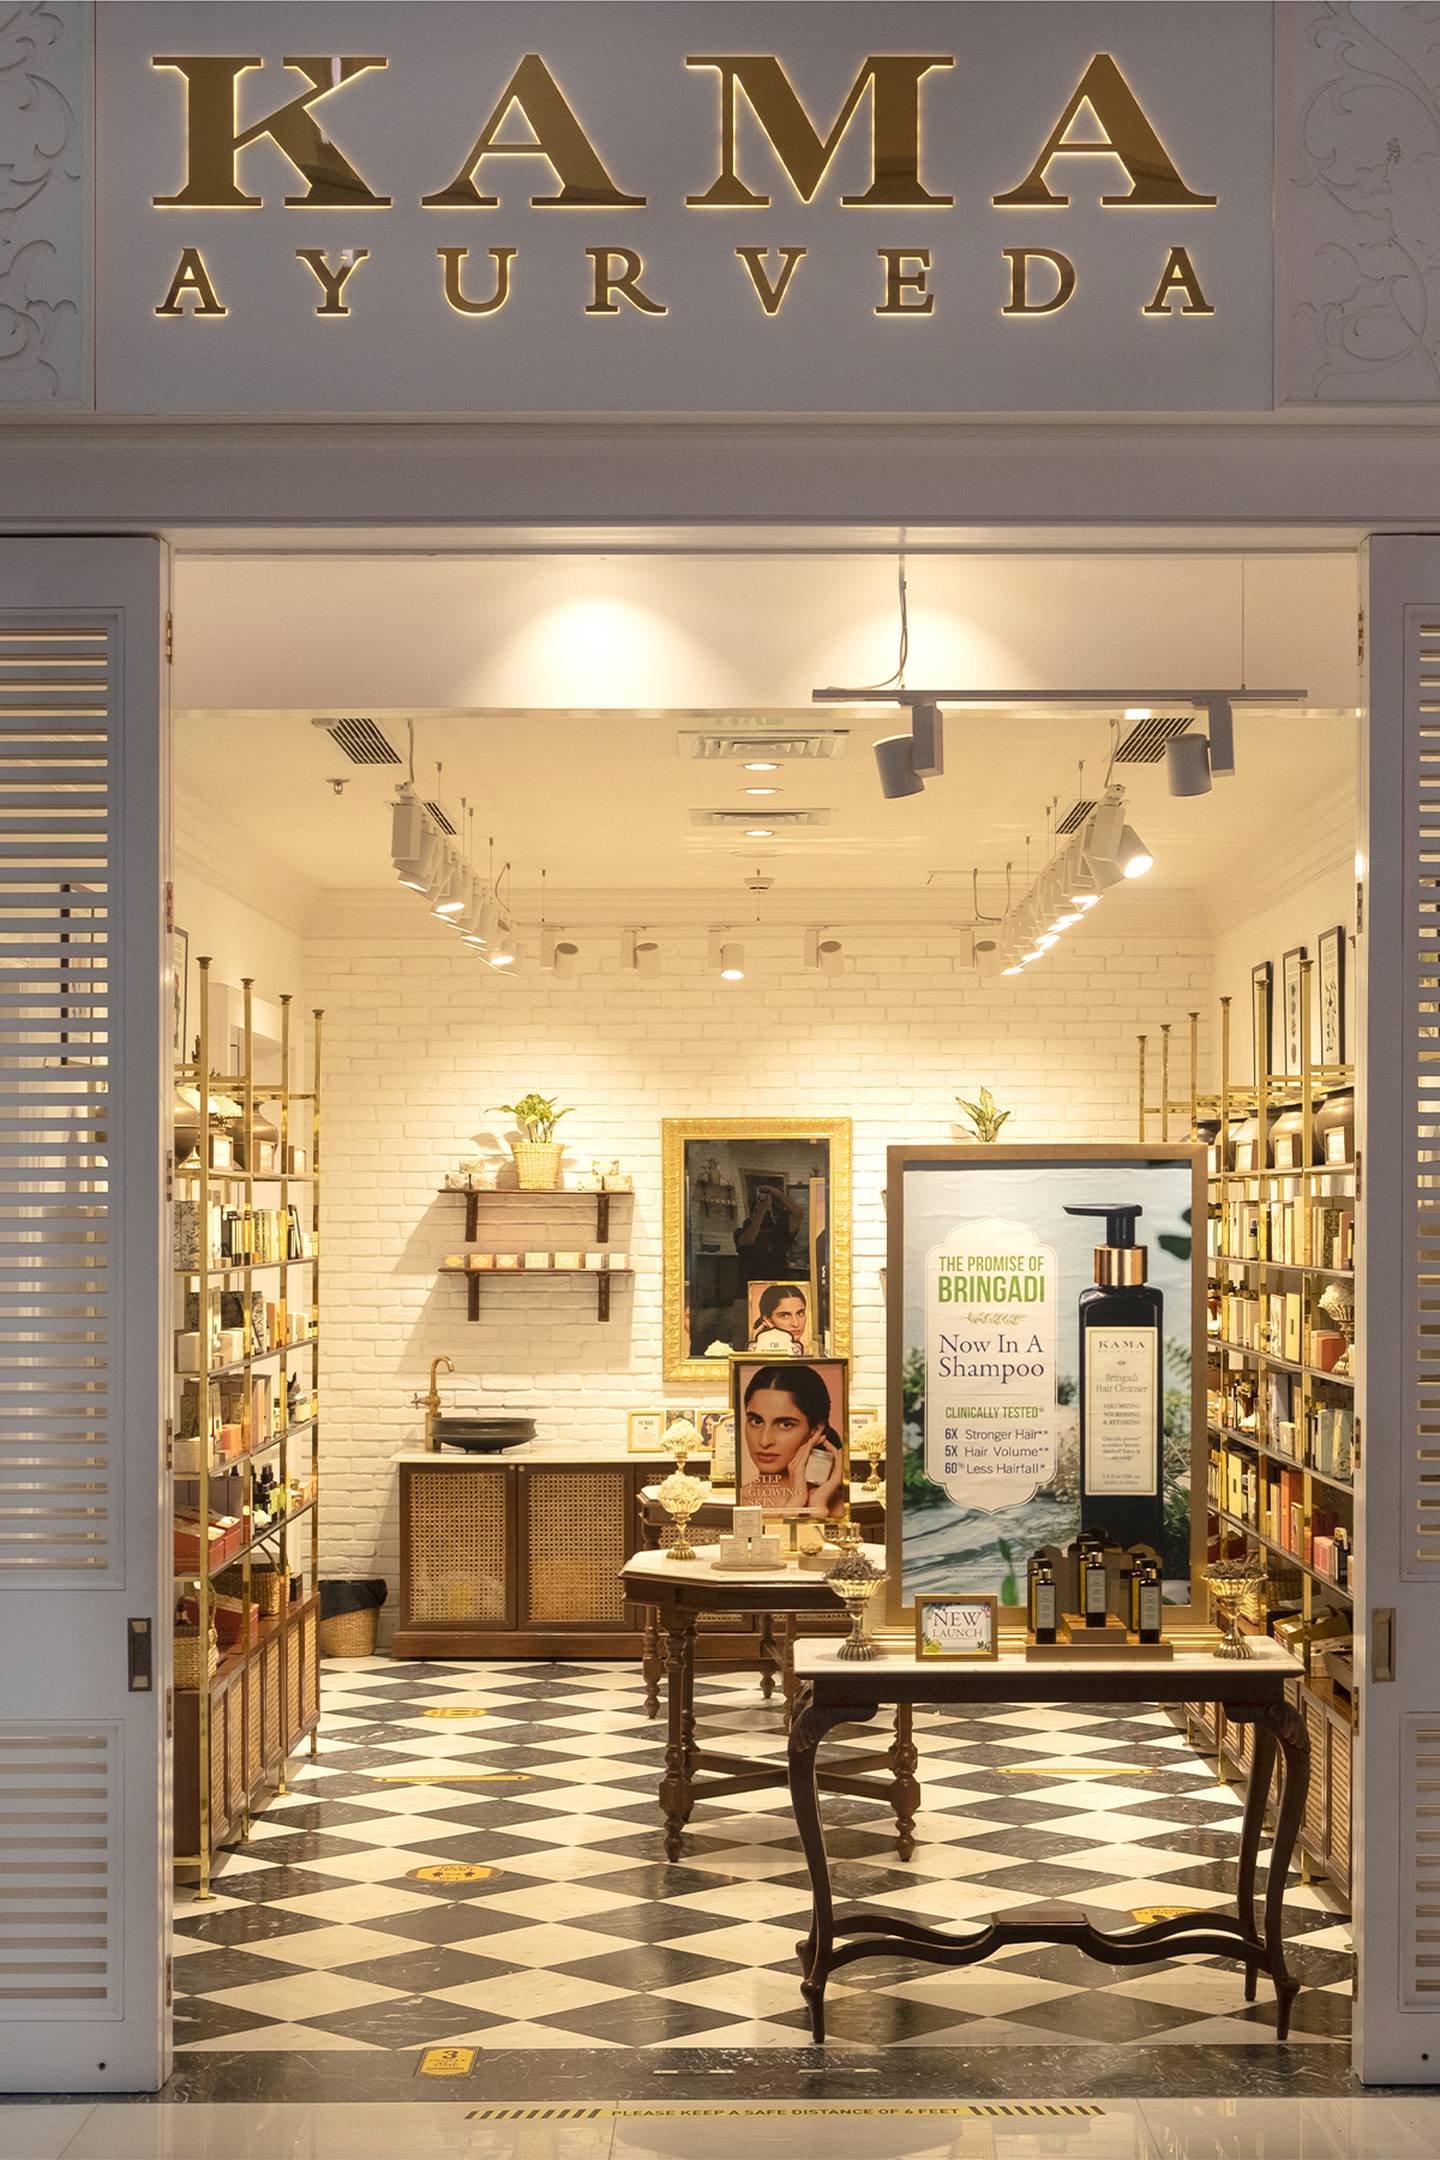 Kama Ayurveda has 49 stand-alone stores across India, 47 store-in-stores and their own e-commerce site. Kama Ayurveda.